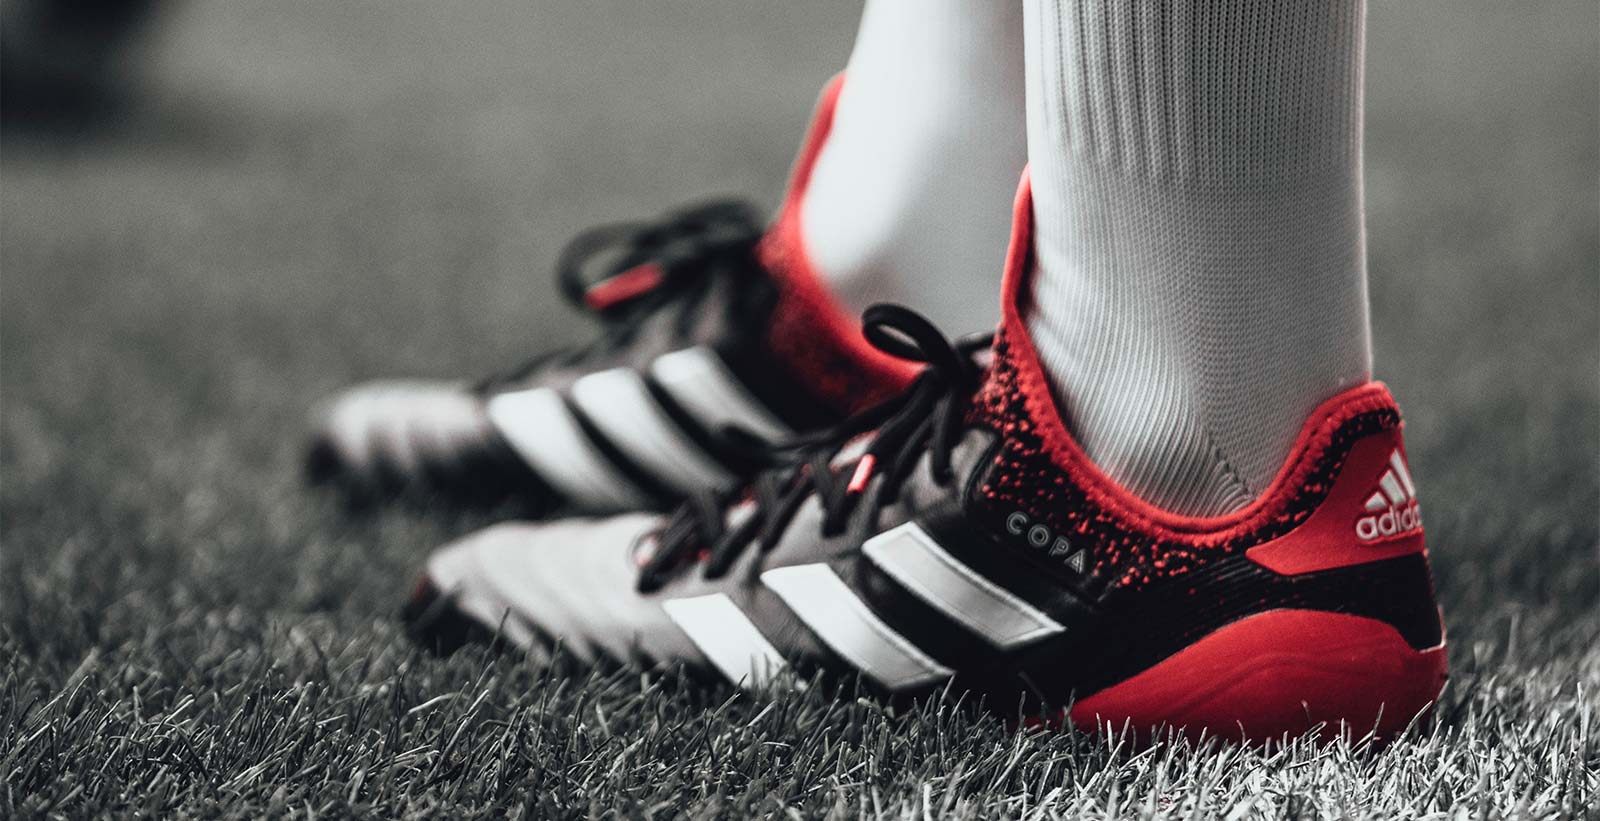 Cold Blooded' Copa 2018 Football Boots Revealed - Footy